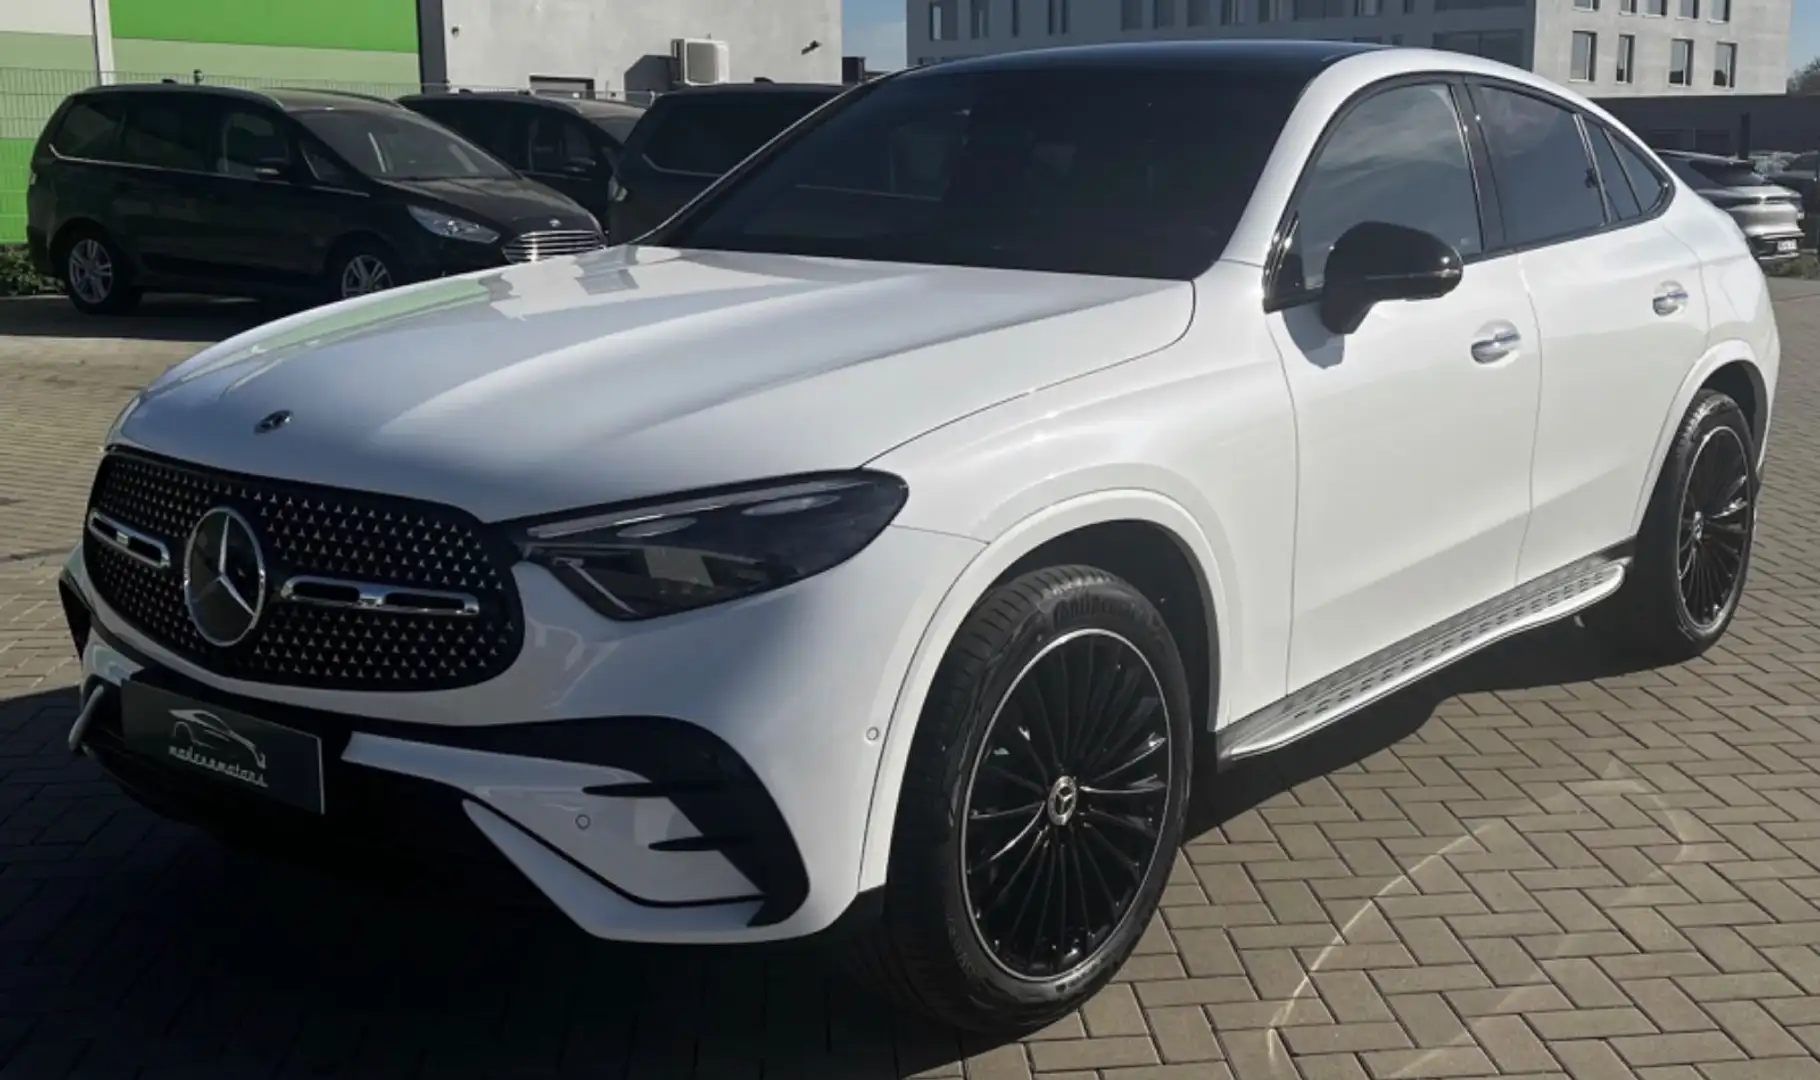 Mercedes-Benz GLC 200 Coupé 4MATIC - EUR1 - ON ORDER White - 2